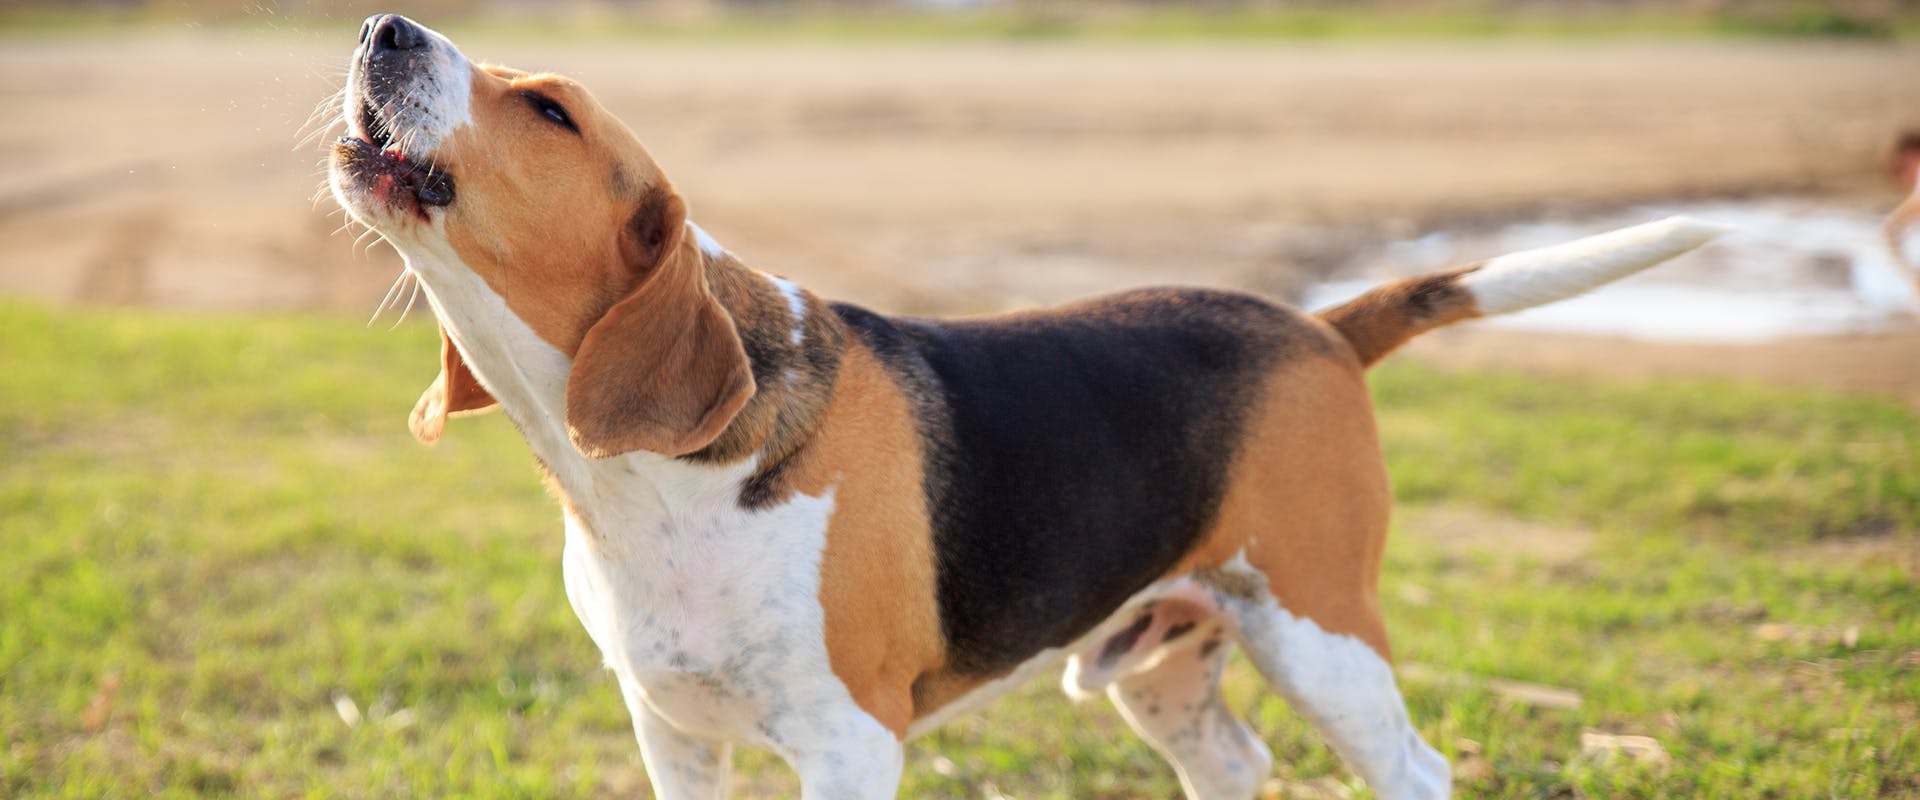 A Beagle dog standing in a field, howling and barking at the sky